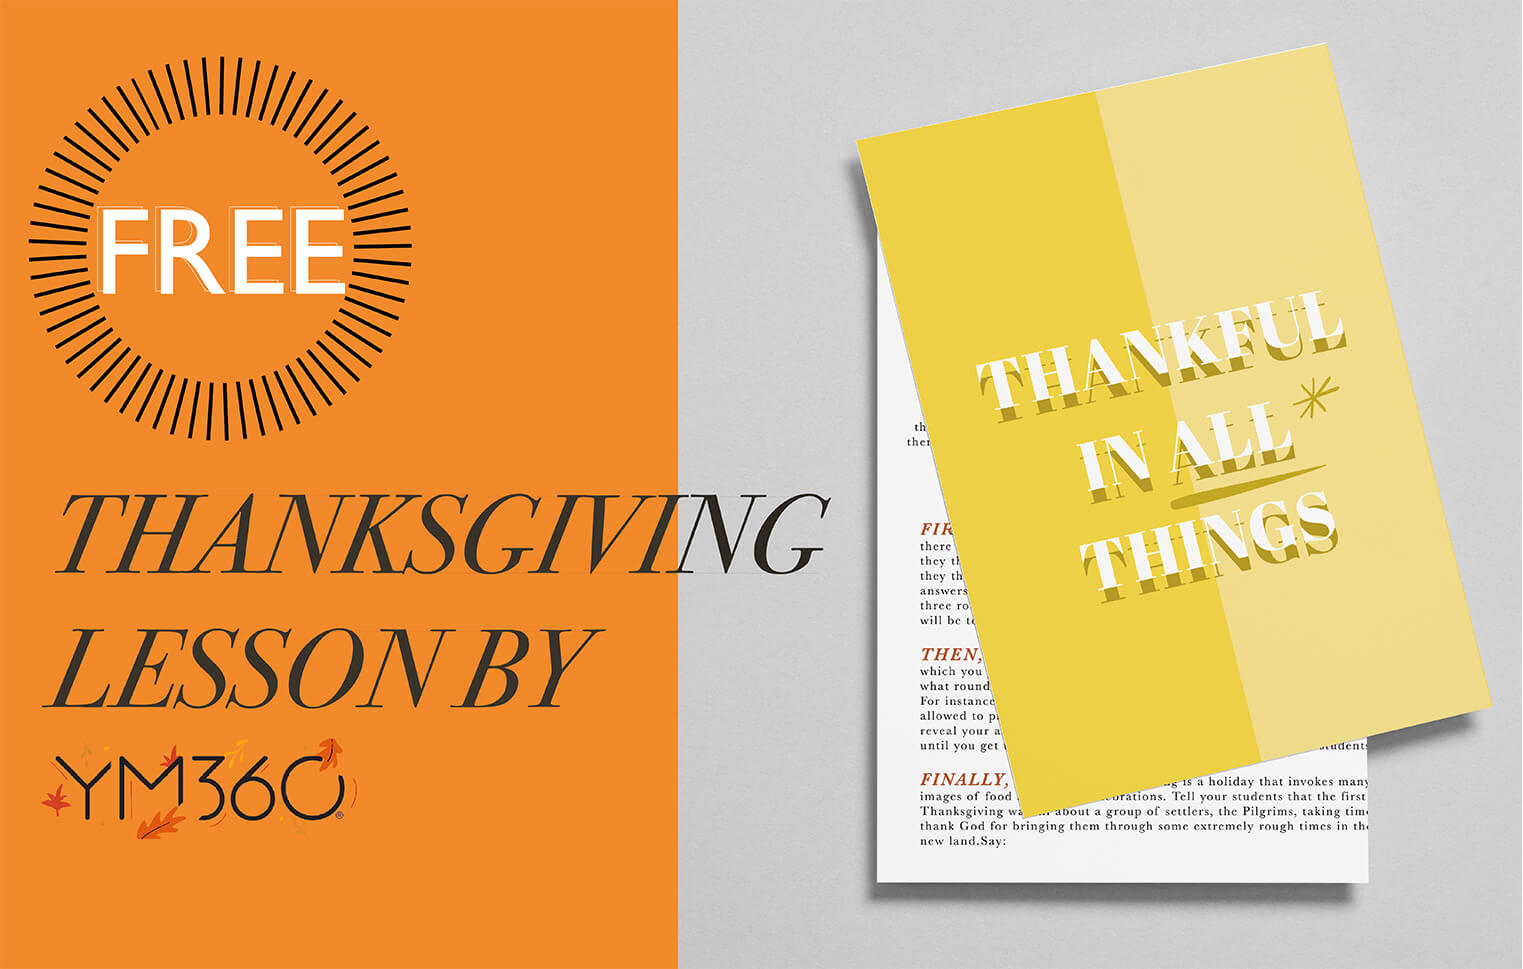 Free Thanksgiving Lesson | Thankful in All Things